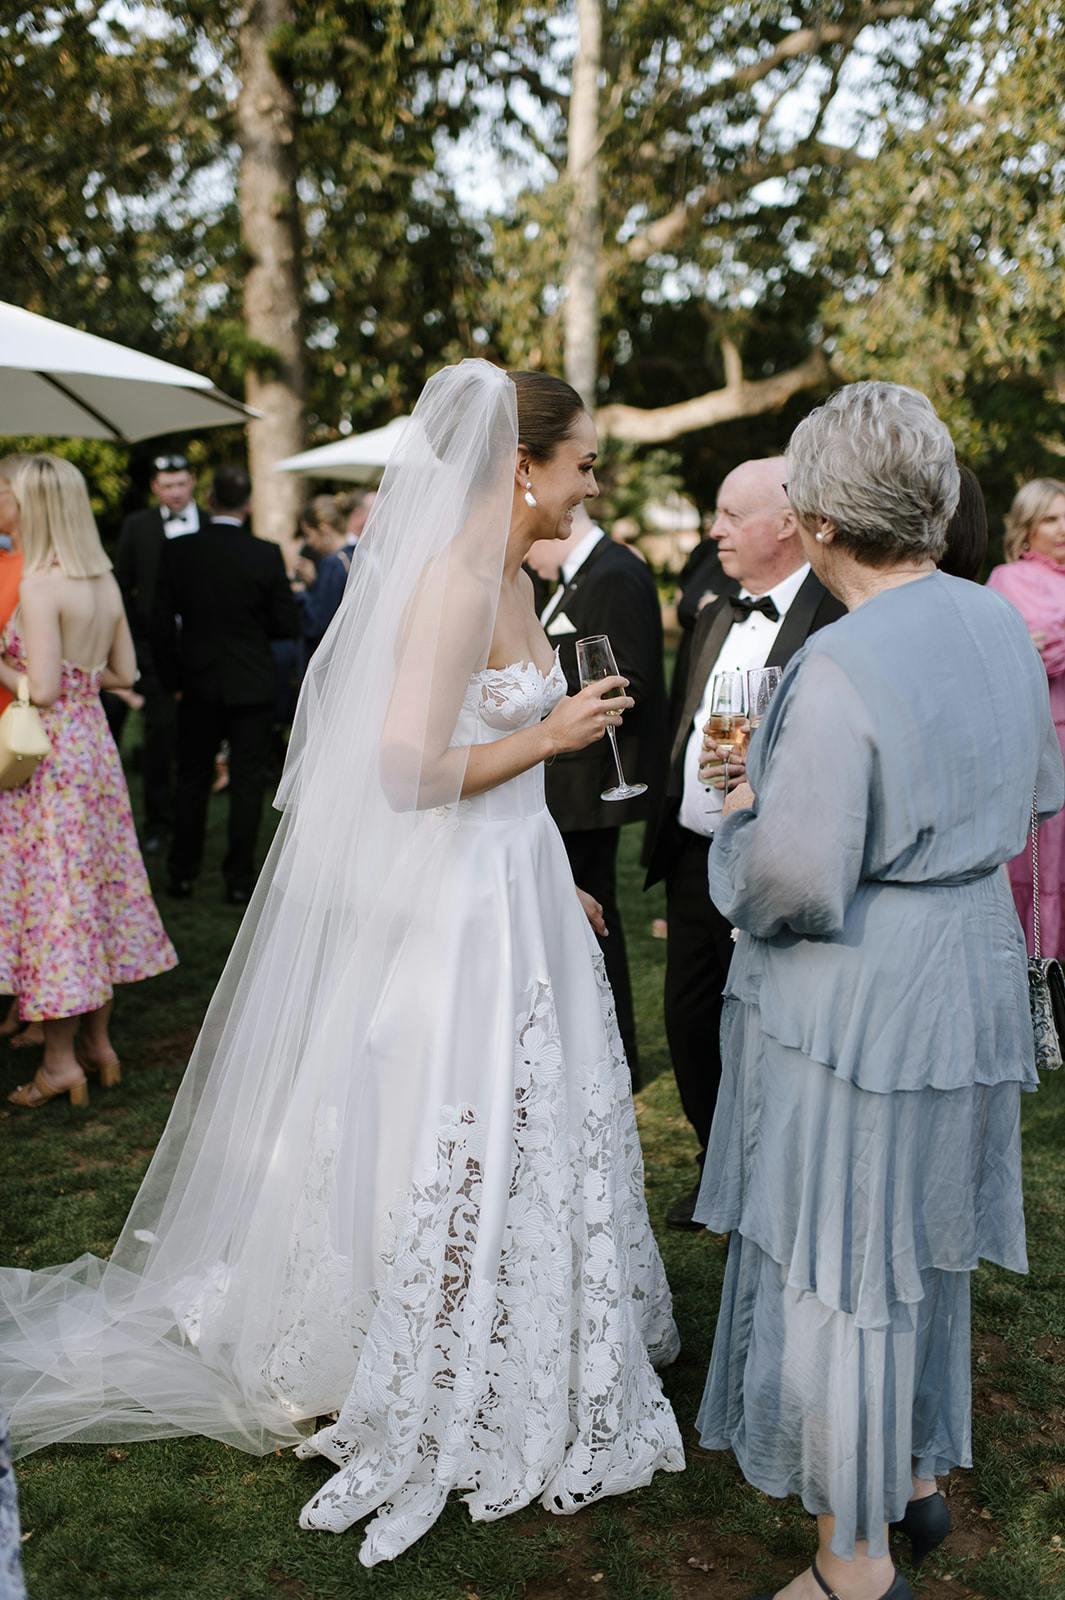 A bride in a white wedding gown with lace details and a long veil converses with two older guests, one in a light blue dress, holding champagne glasses. Other guests in formal attire and umbrellas are visible in the background at this outdoor event.